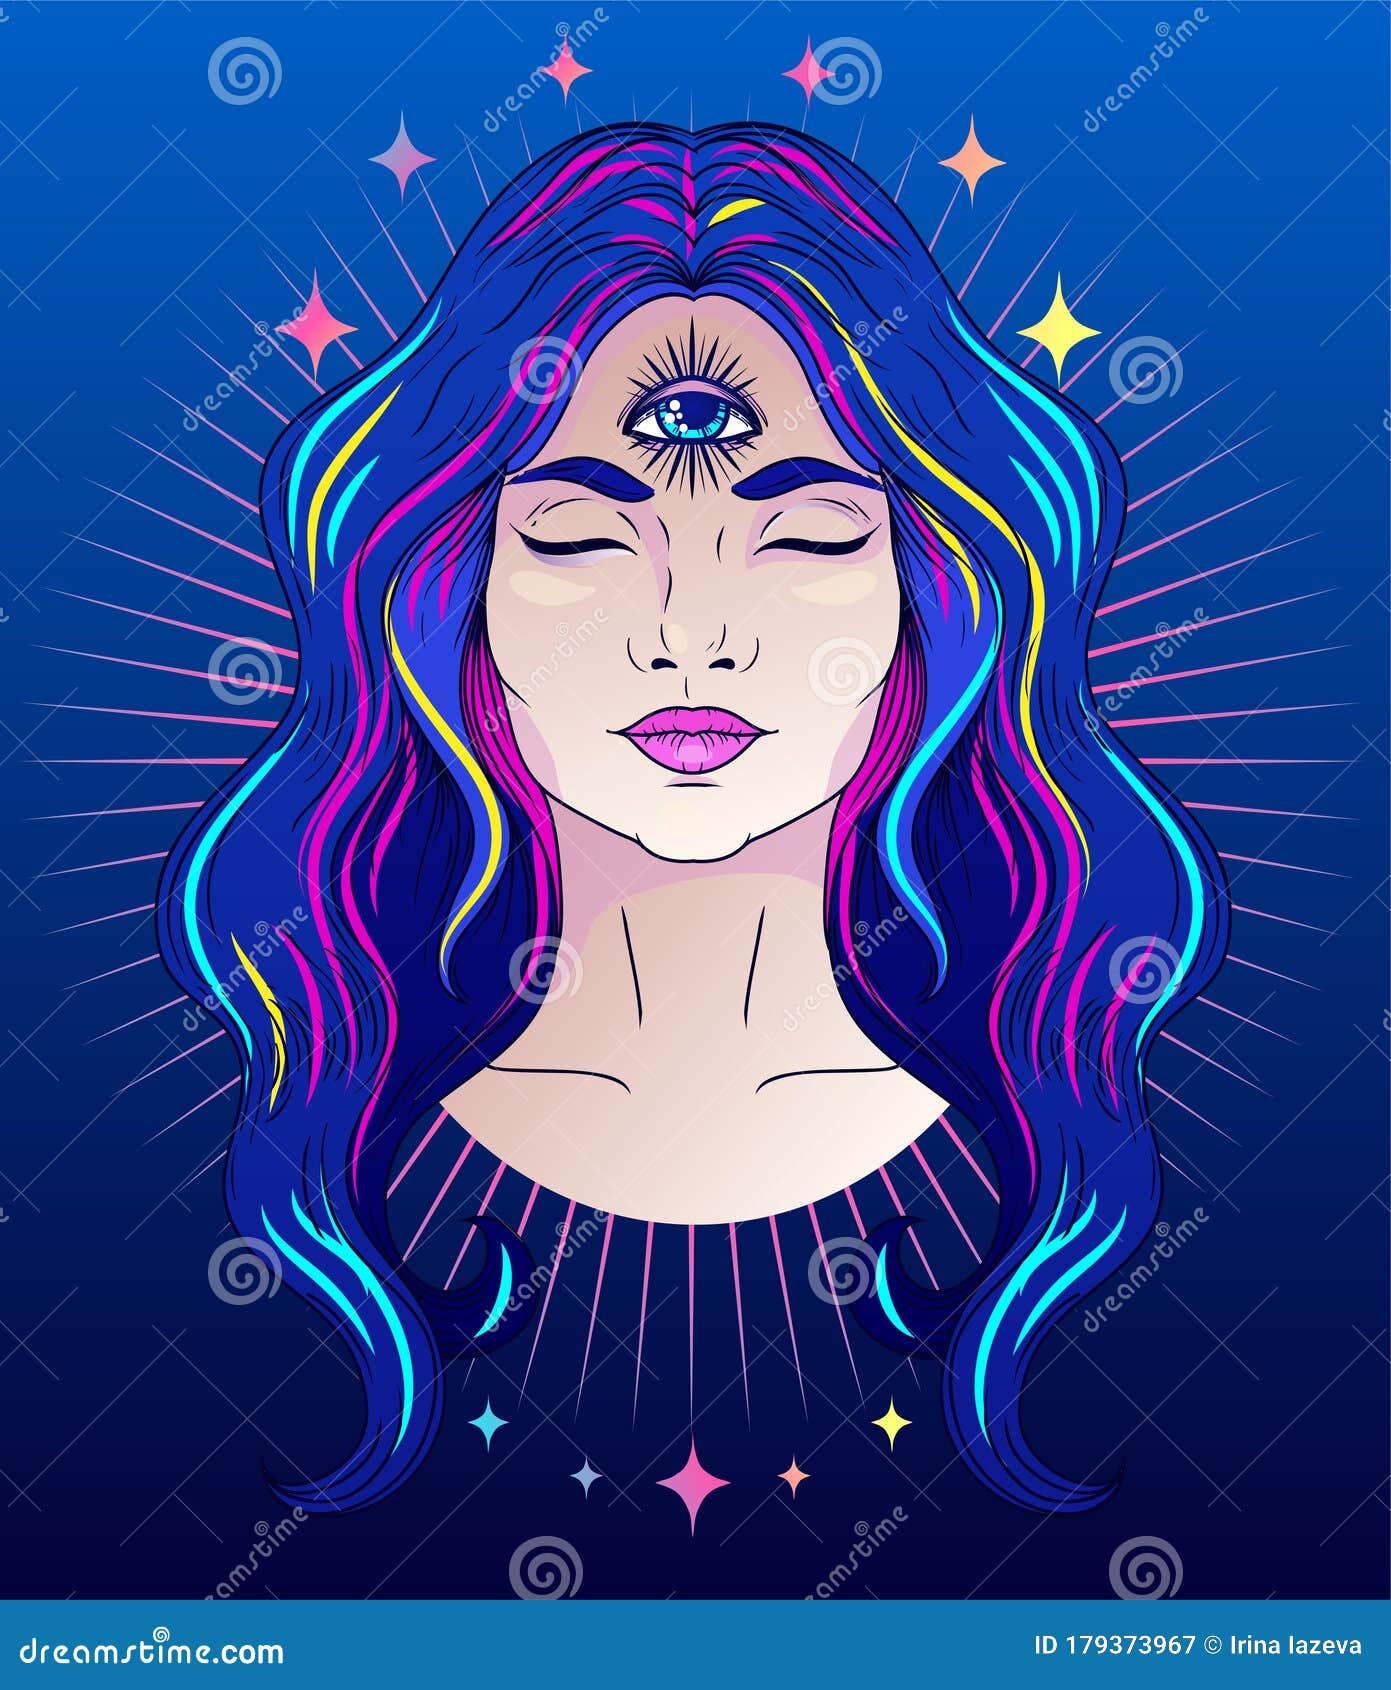 poster with meditative woman with third eye